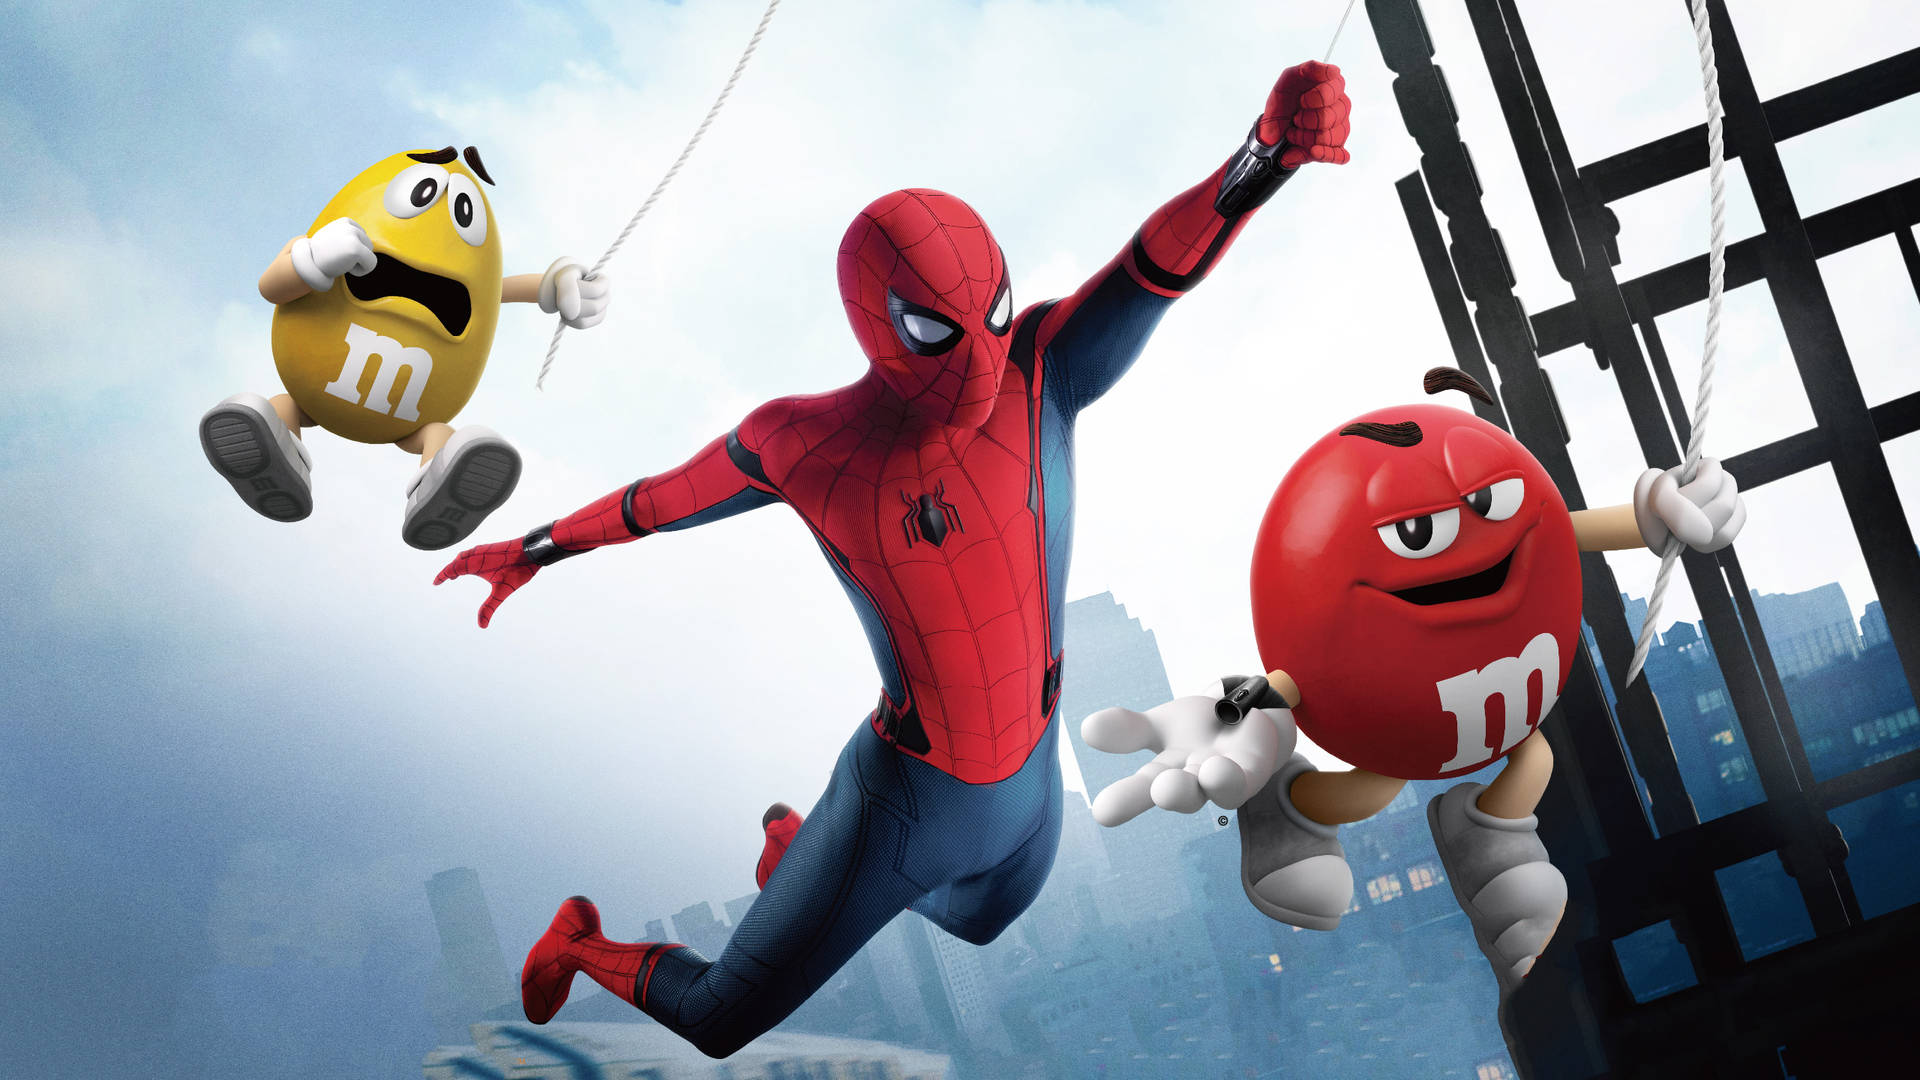 Spiderman takes a break from the the superhero life with M&M's candy Wallpaper